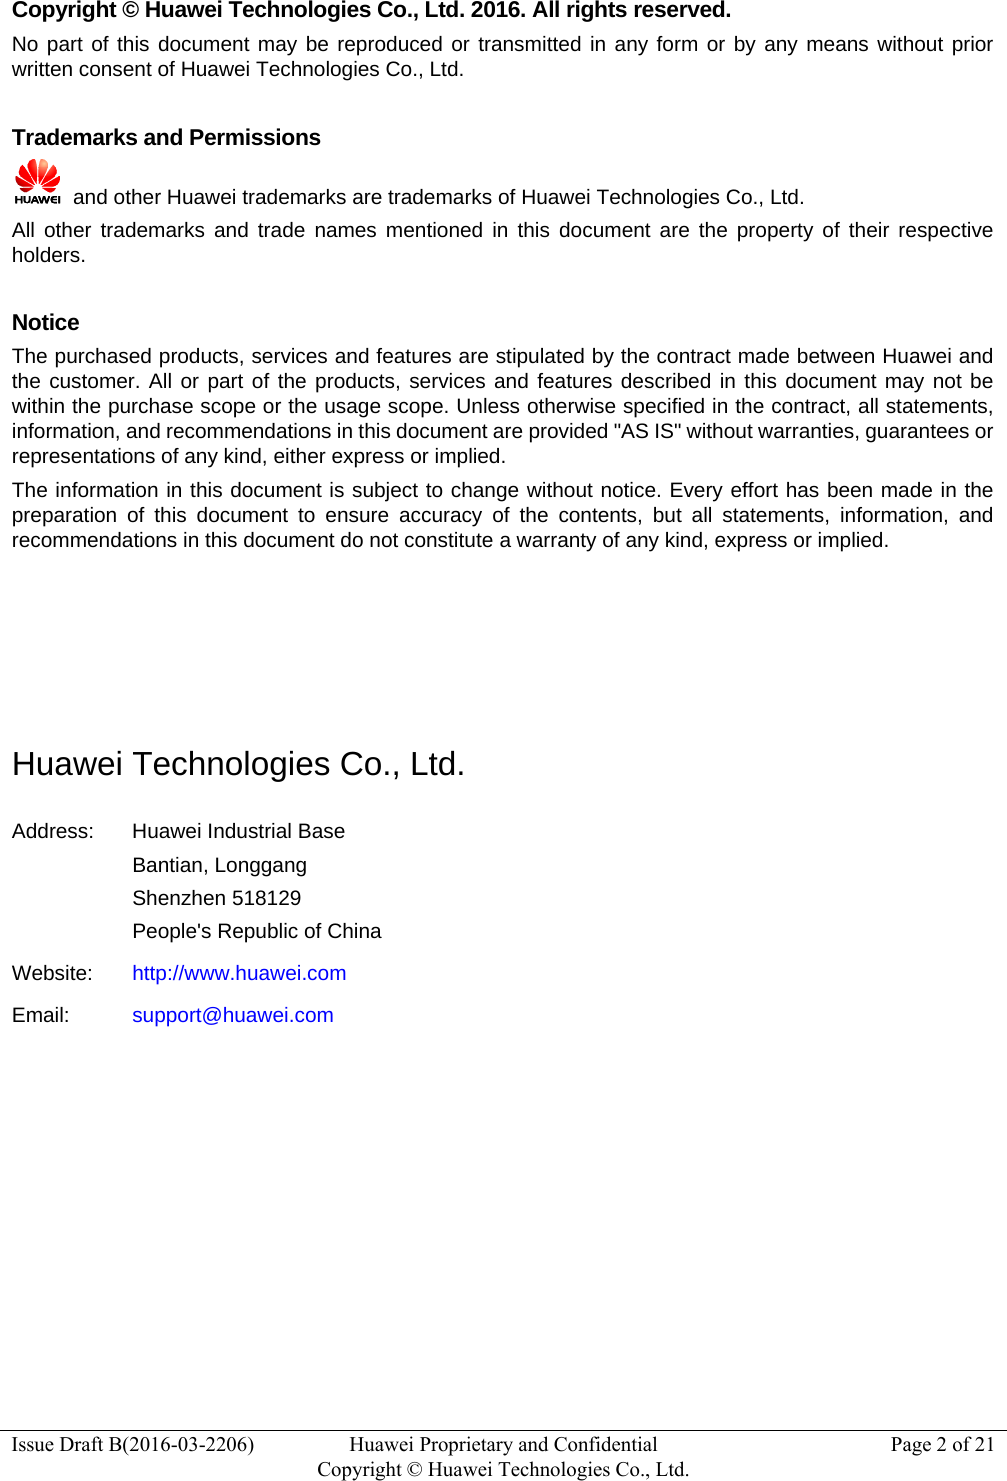  Issue Draft B(2016-03-2206)  Huawei Proprietary and Confidential Copyright © Huawei Technologies Co., Ltd.Page 2 of 21 Copyright © Huawei Technologies Co., Ltd. 2016. All rights reserved. No part of this document may be reproduced or transmitted in any form or by any means without prior written consent of Huawei Technologies Co., Ltd.  Trademarks and Permissions   and other Huawei trademarks are trademarks of Huawei Technologies Co., Ltd. All other trademarks and trade names mentioned in this document are the property of their respective holders.  Notice The purchased products, services and features are stipulated by the contract made between Huawei and the customer. All or part of the products, services and features described in this document may not be within the purchase scope or the usage scope. Unless otherwise specified in the contract, all statements, information, and recommendations in this document are provided &quot;AS IS&quot; without warranties, guarantees or representations of any kind, either express or implied. The information in this document is subject to change without notice. Every effort has been made in the preparation of this document to ensure accuracy of the contents, but all statements, information, and recommendations in this document do not constitute a warranty of any kind, express or implied.     Huawei Technologies Co., Ltd. Address:  Huawei Industrial Base Bantian, Longgang Shenzhen 518129 People&apos;s Republic of China Website:  http://www.huawei.com Email:  support@huawei.com          